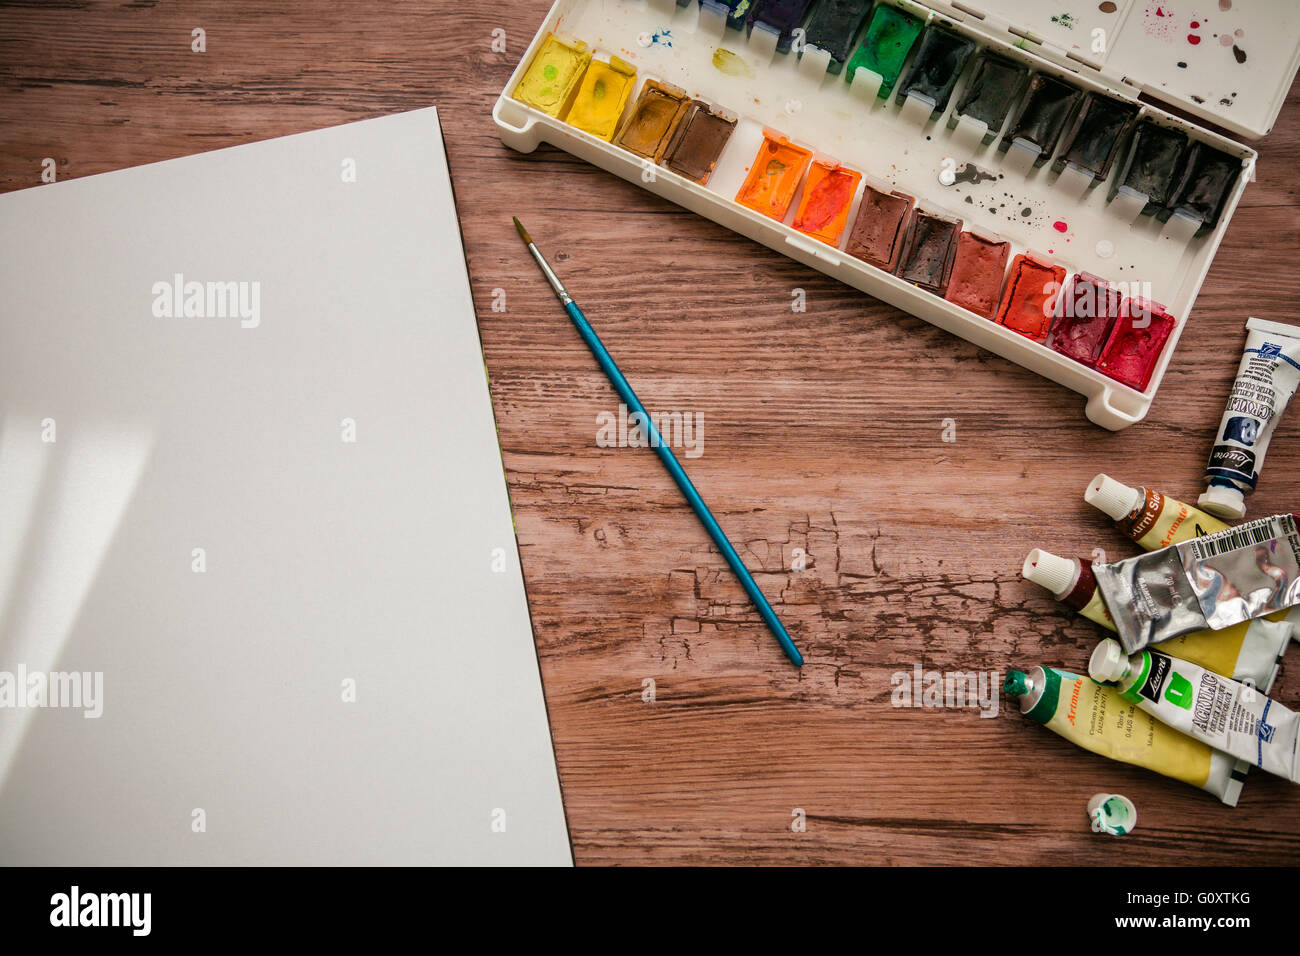 Paper, Watercolors, Paint Brush and Markers on Wooden Table Stock Photo -  Image of draw, white: 81399578